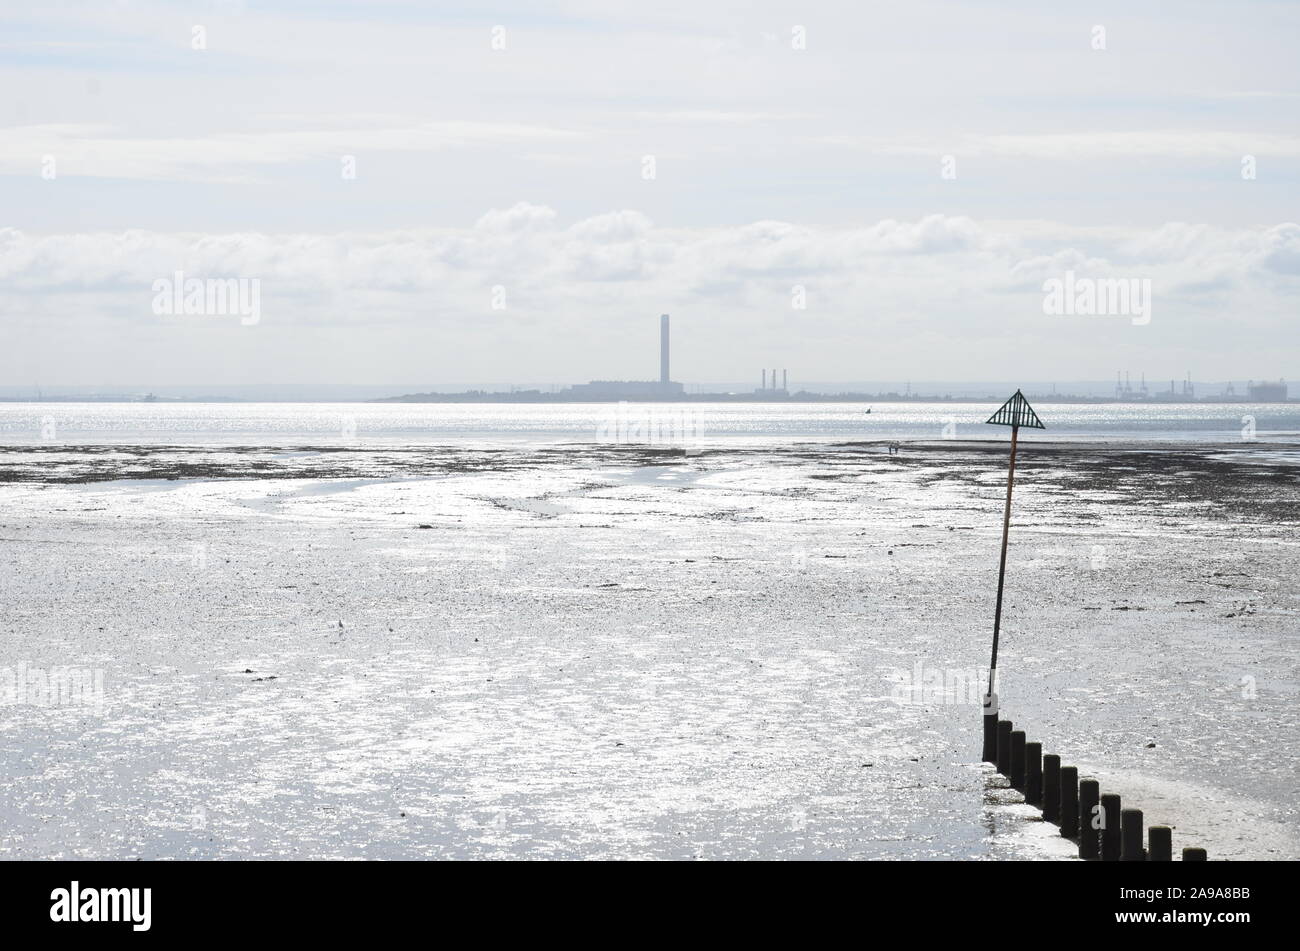 Isle-of-Grain refinery seen from Southend-on-Sea, Essex Stock Photo